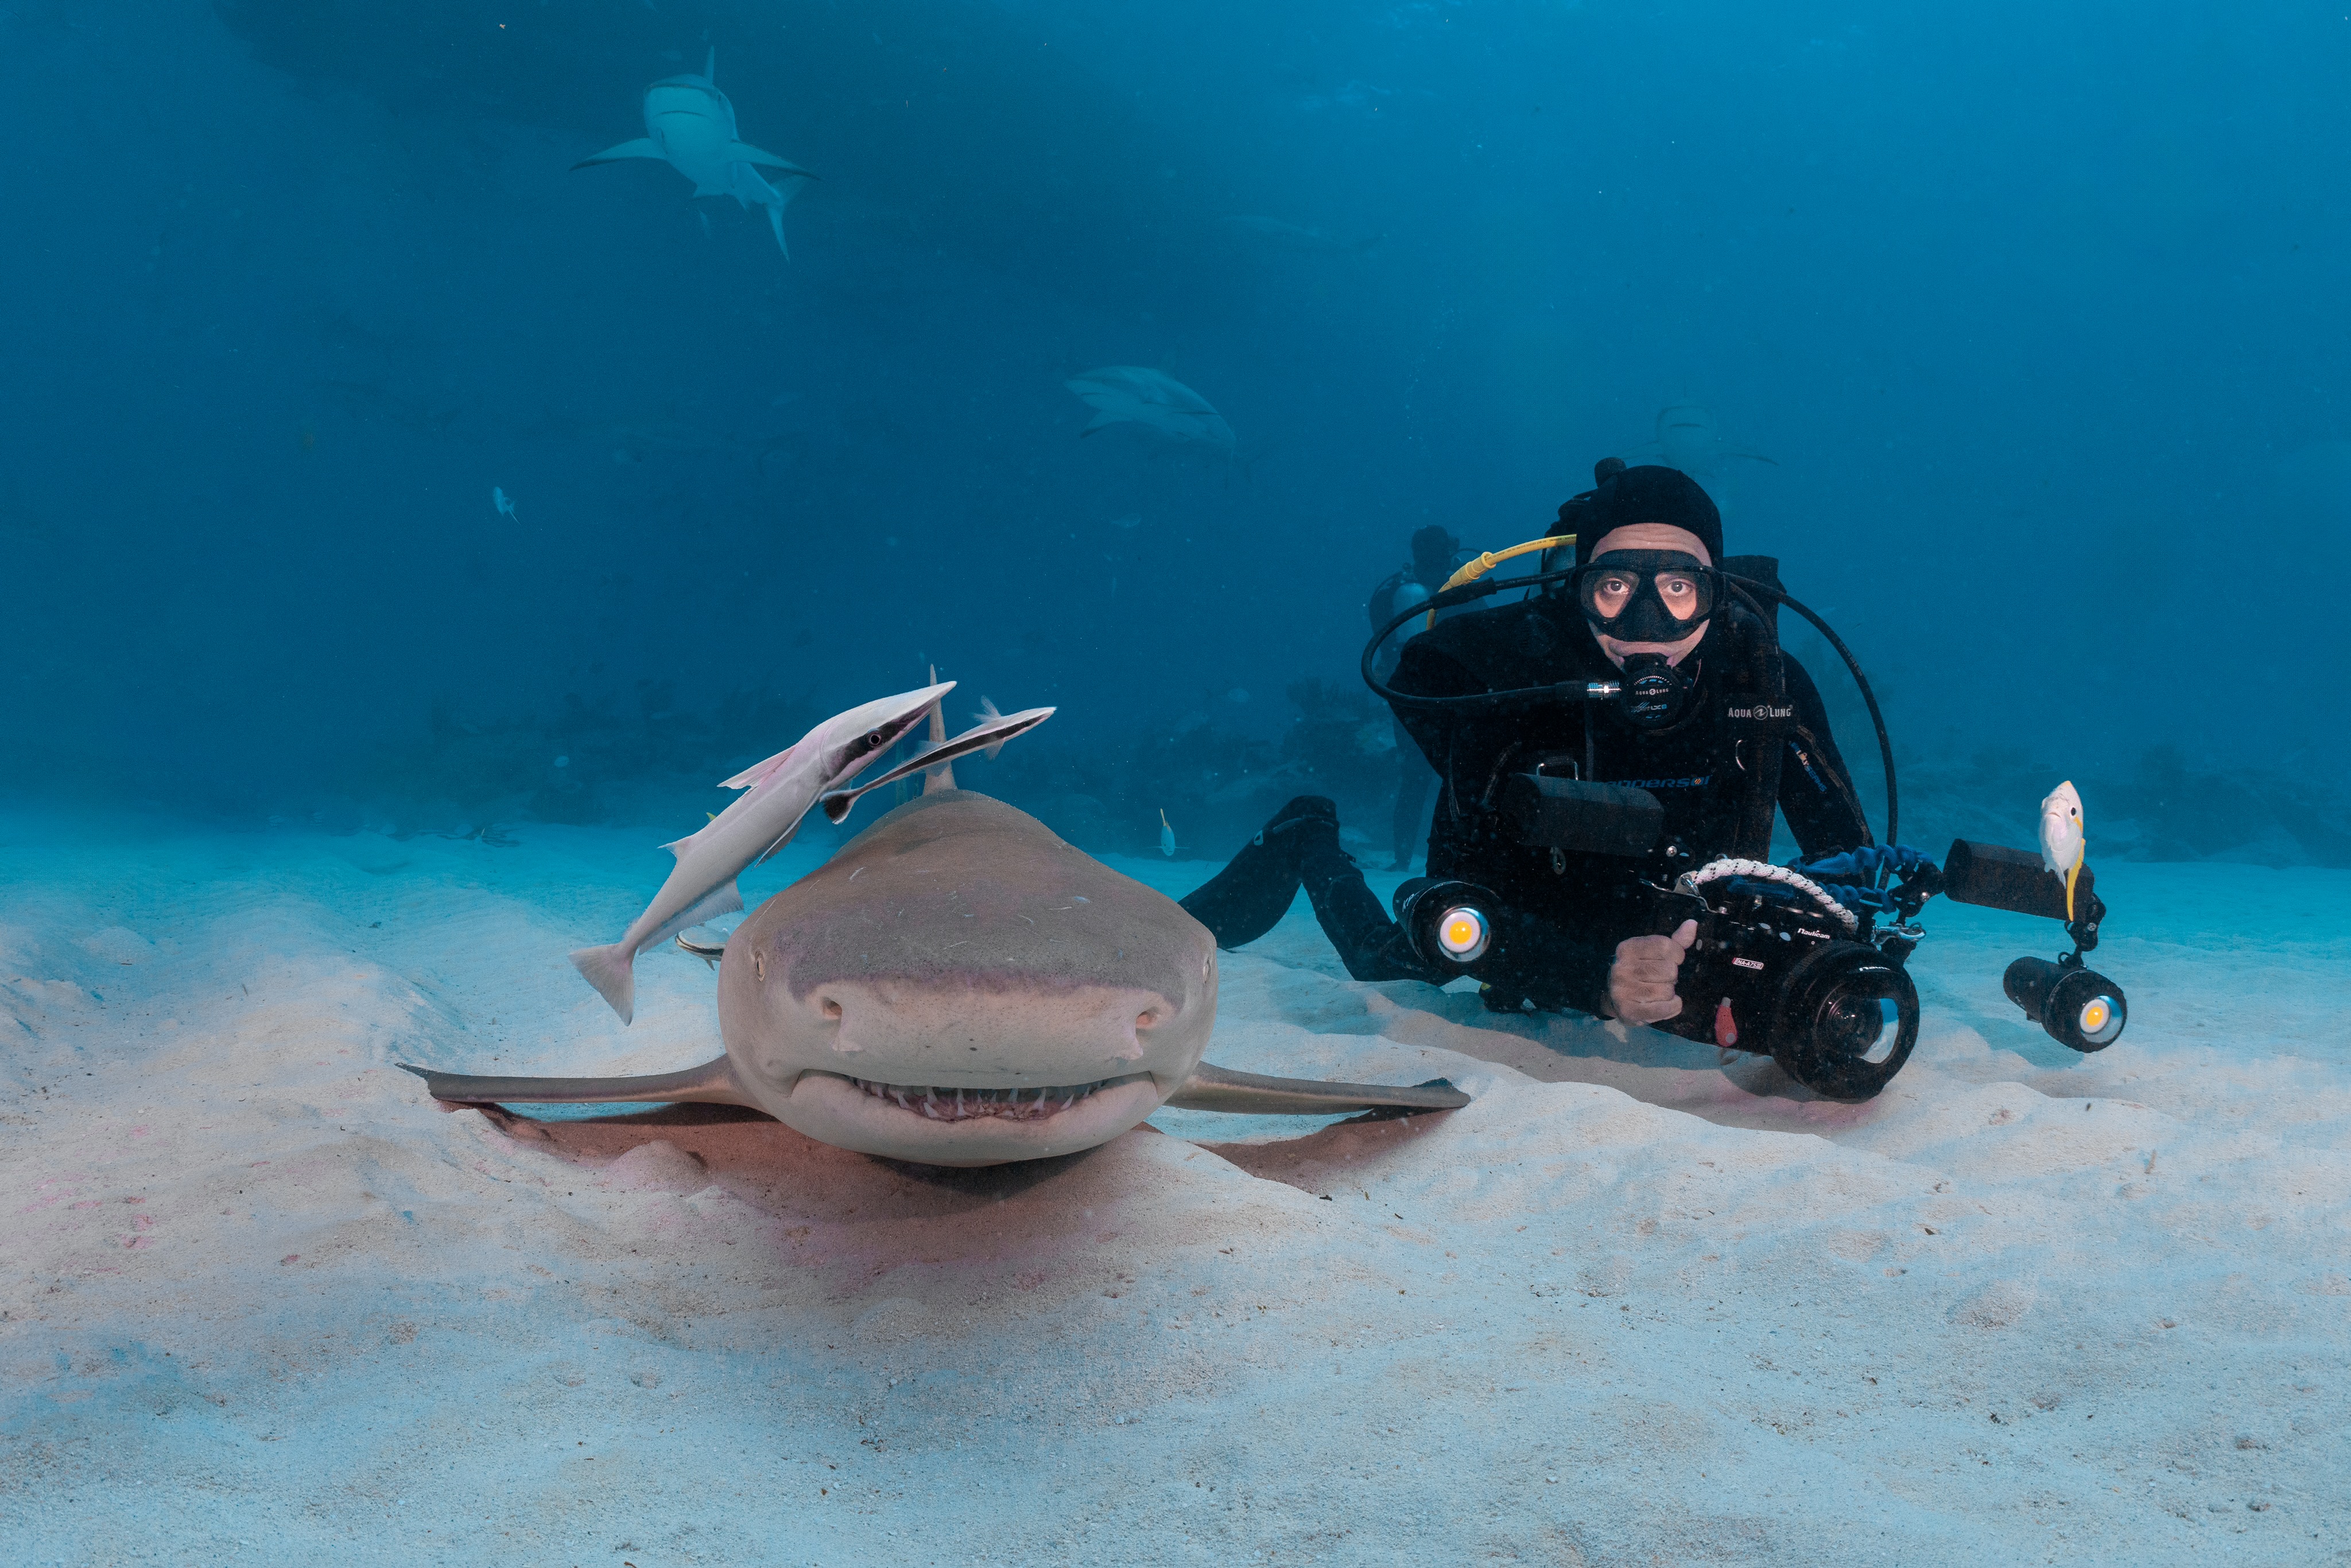 Through your eyes: Orthopaedic surgeon Khurram Pervaiz, M.D., H'10, finds inspiration, beauty under the sea